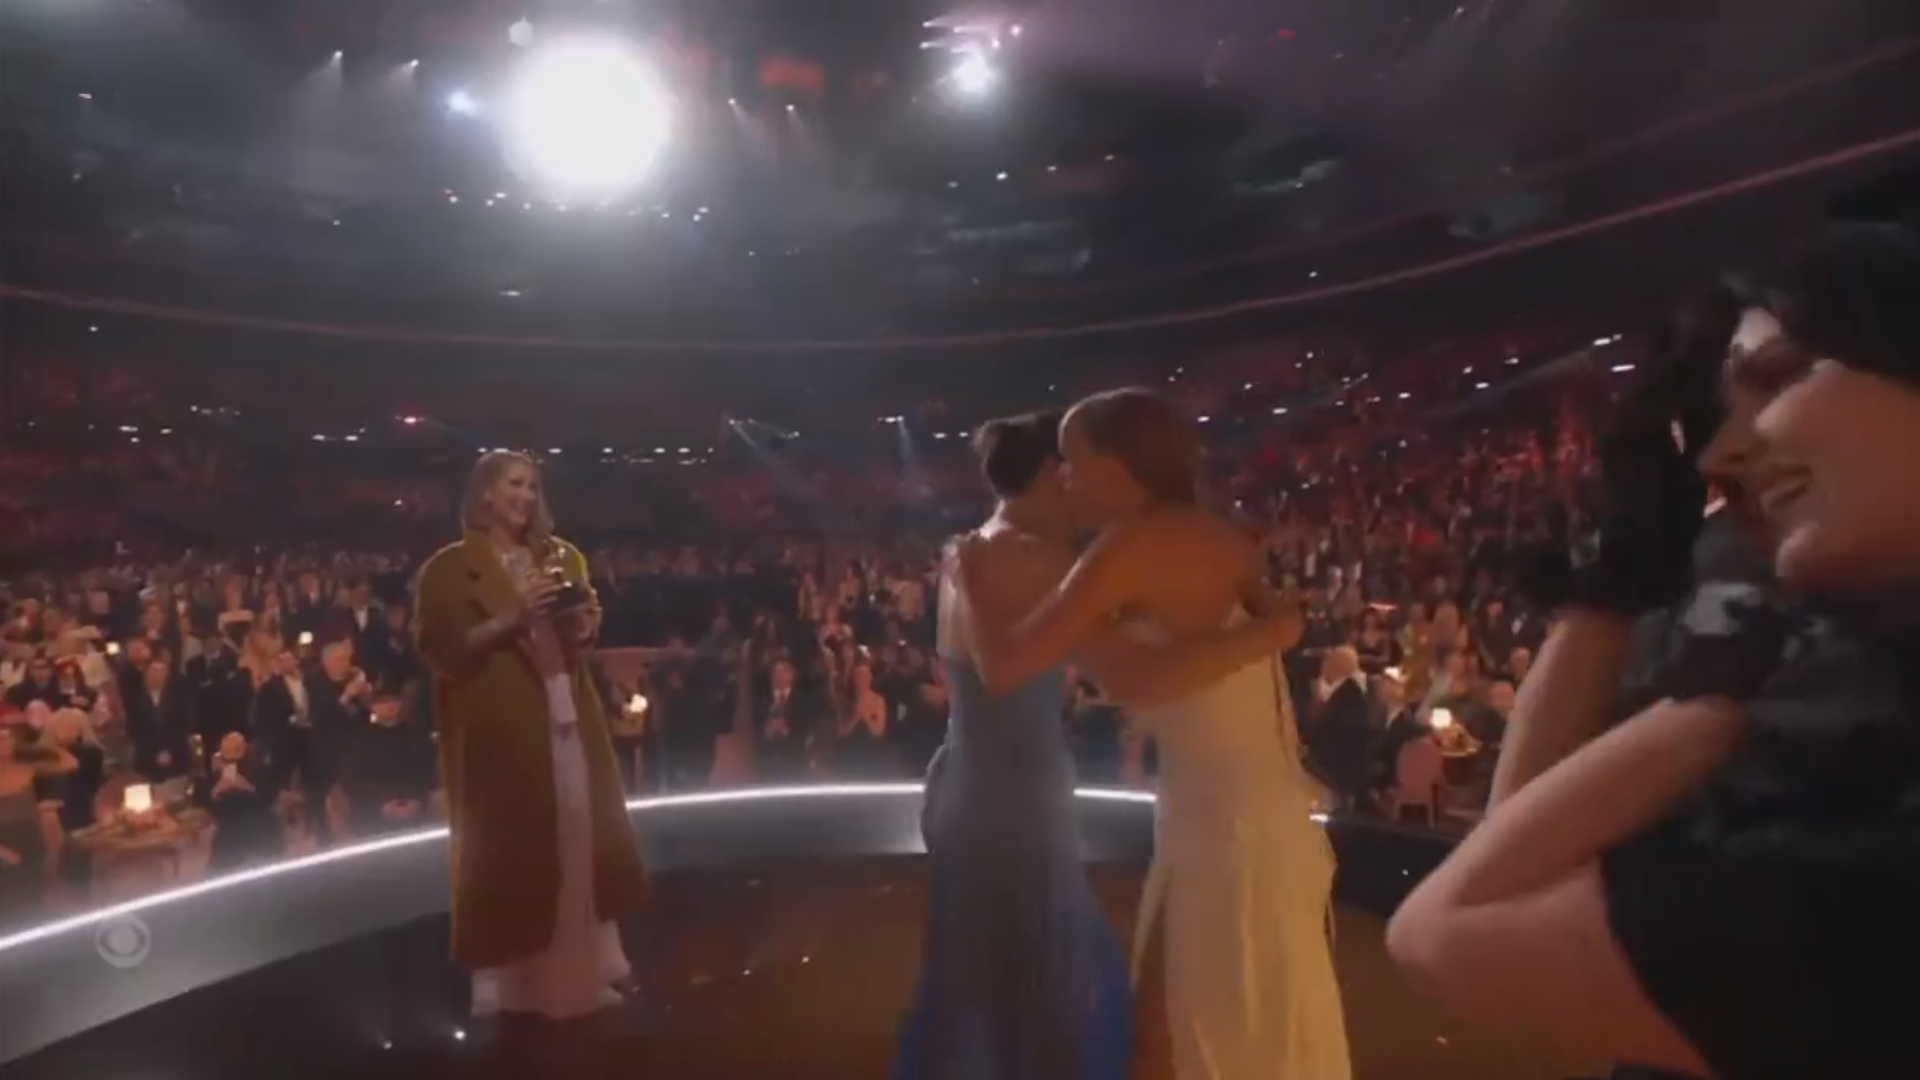 After she announced Taylor as the winner, the “Anti-Hero” singer took to the stage and hugged warmly with her collaborators Jack Antonoff and Lana Del Rey before collecting her trophy from the music legend.(Photo: X)